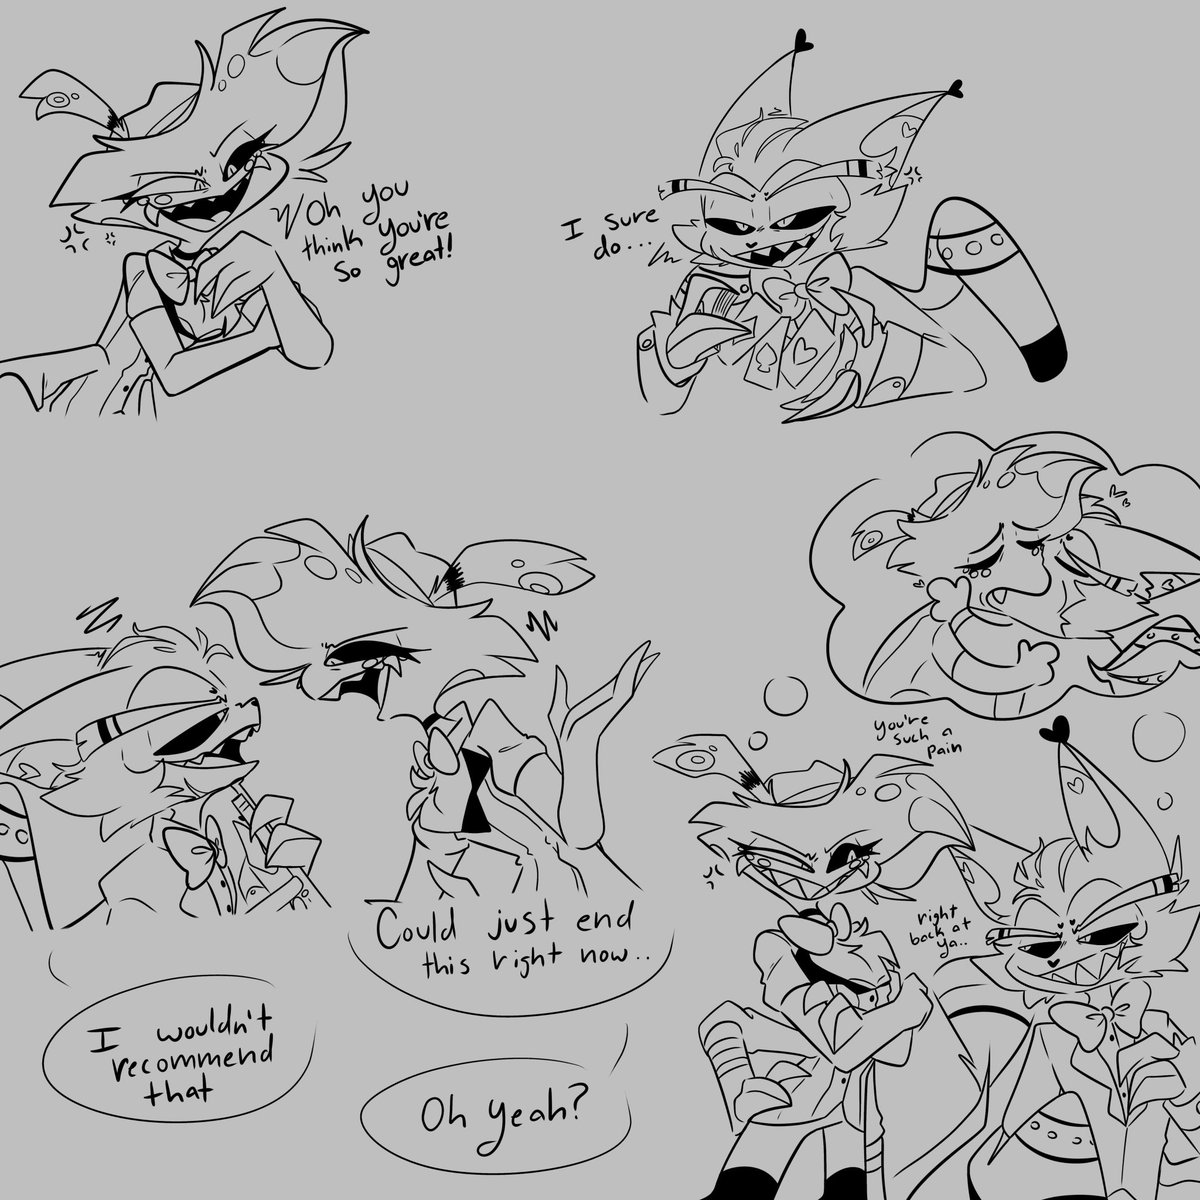 Huskerdust except it's an AU where they're both overlords and they slowly fall in love through a rivalry 
Very messy doodles I'm still sick lol

#huskerdust #huskerdustfanart #huskerdustAU #huskhazbinhotel #angeldusthazbinhotel